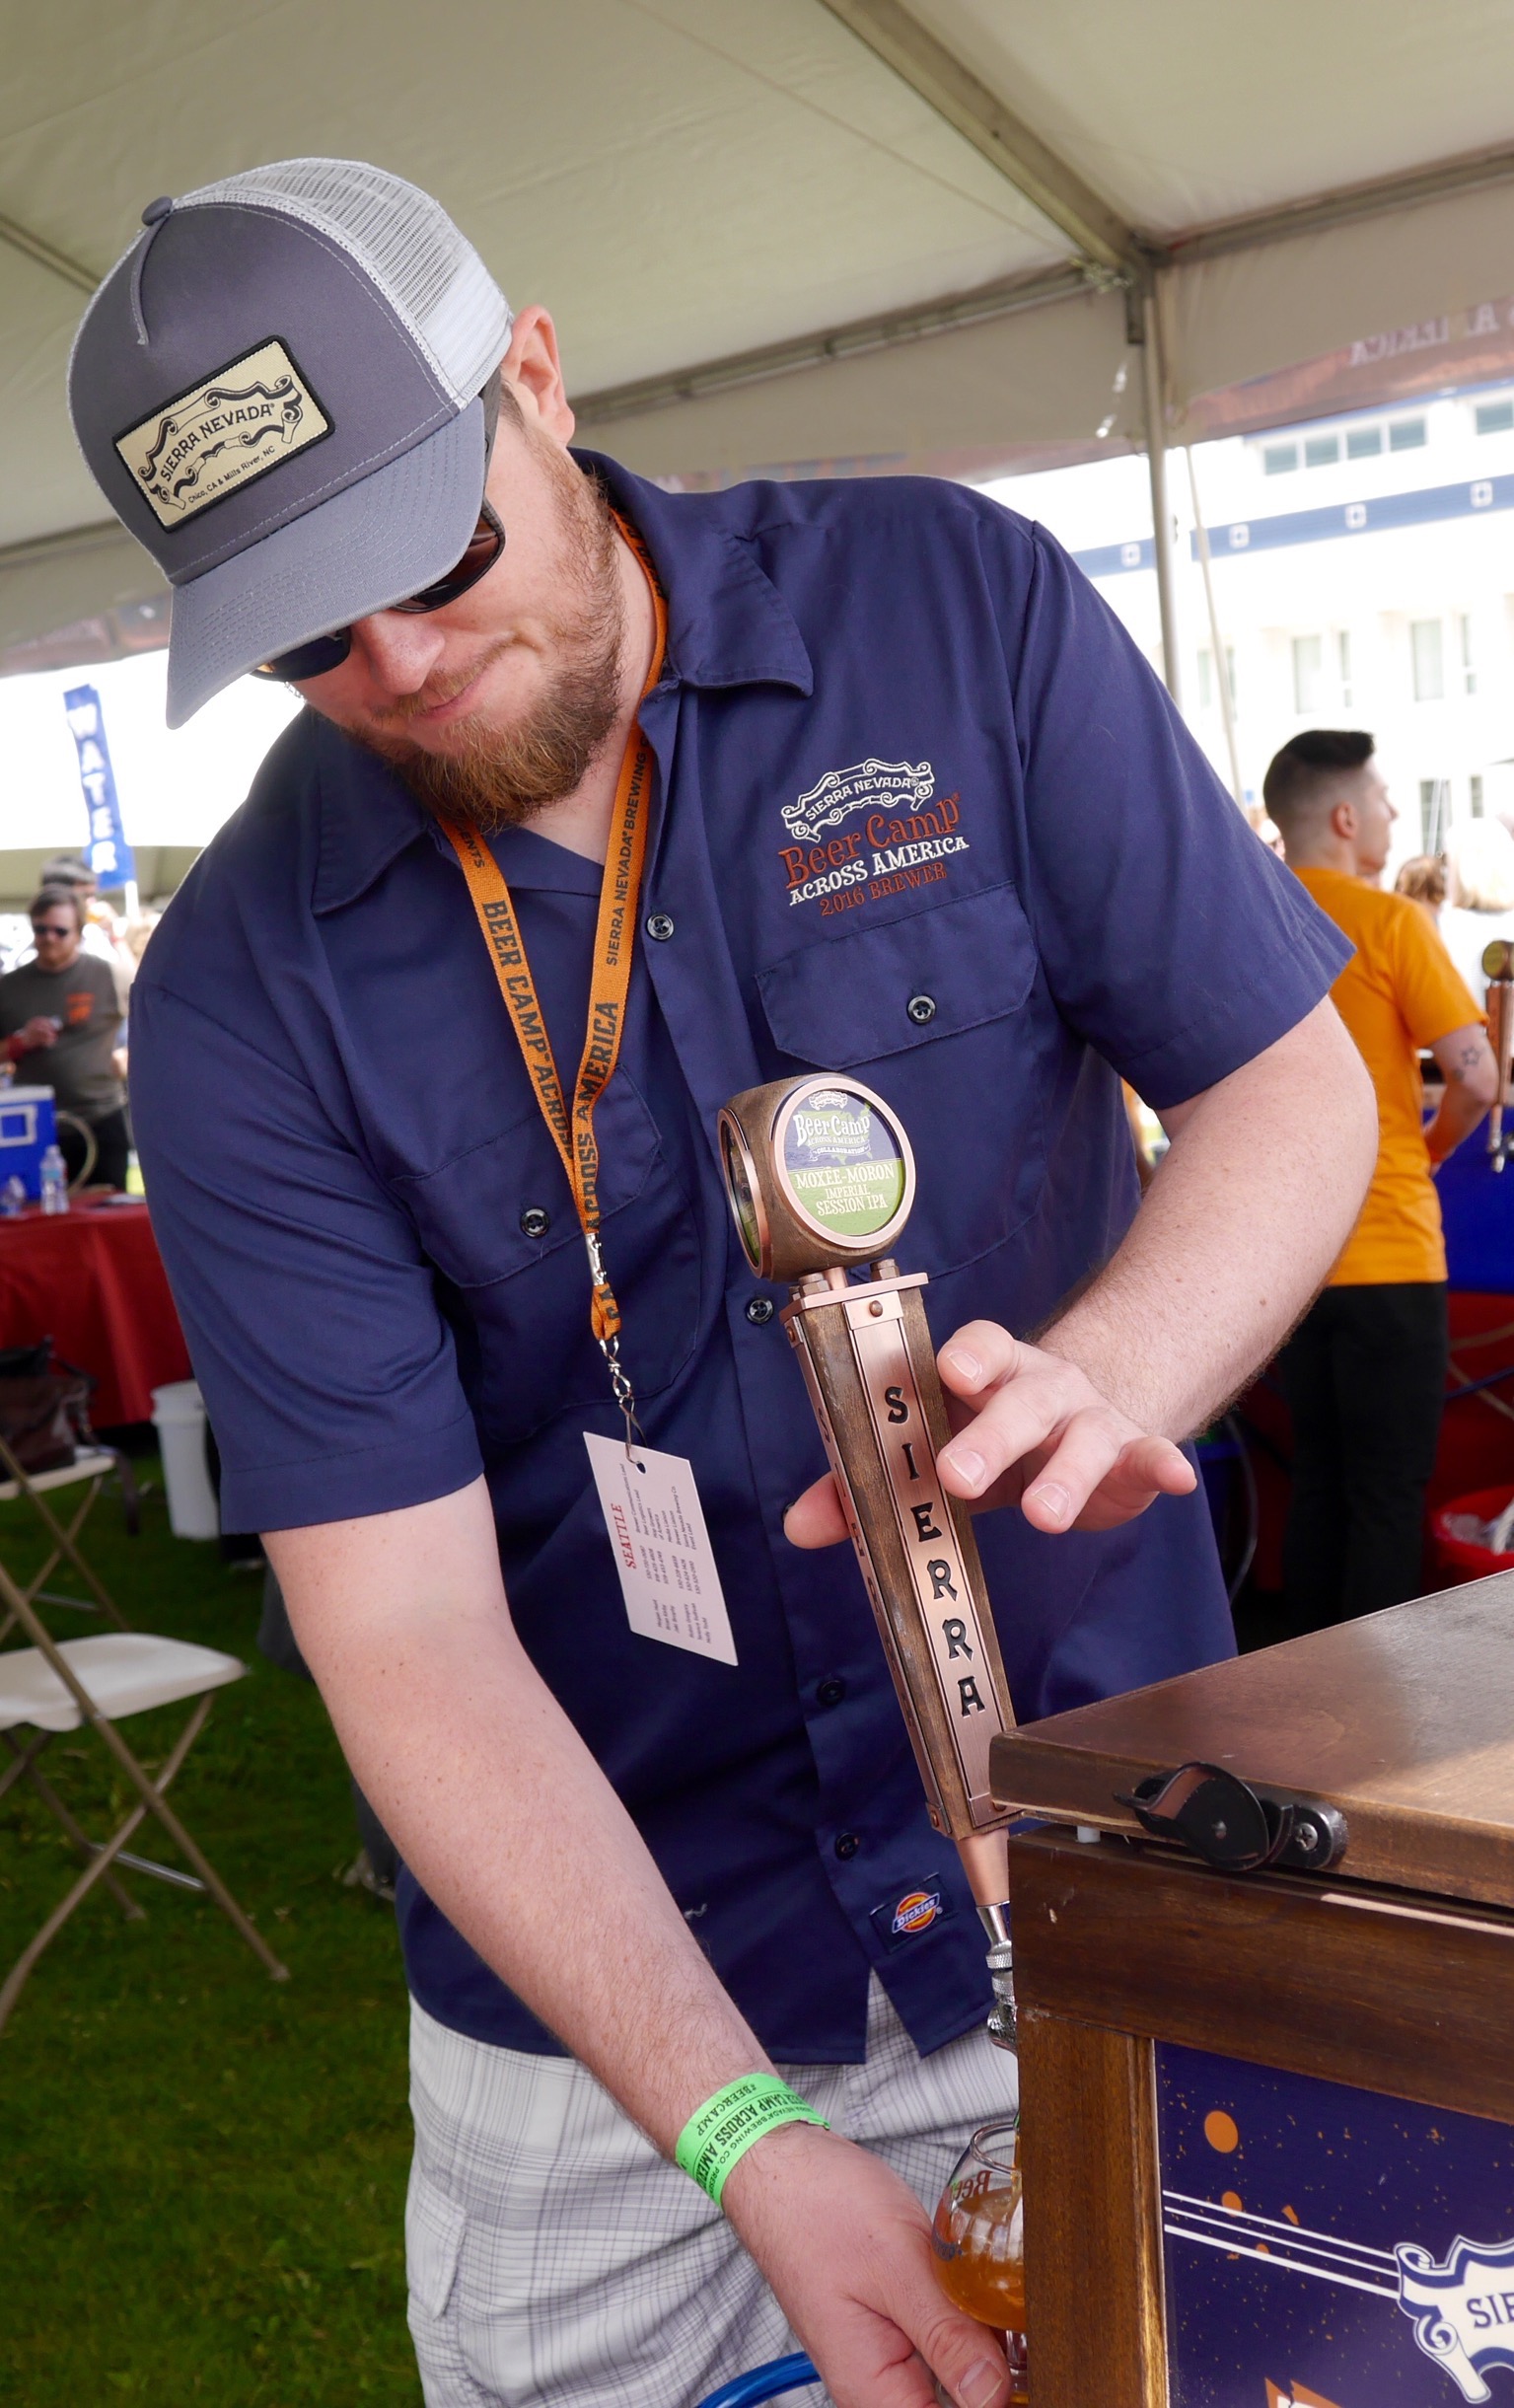 A pour of Moxee Moron at Sierra Nevada Beer Camp Across America Festival in Seattle. (photo by Cat Stelzer)